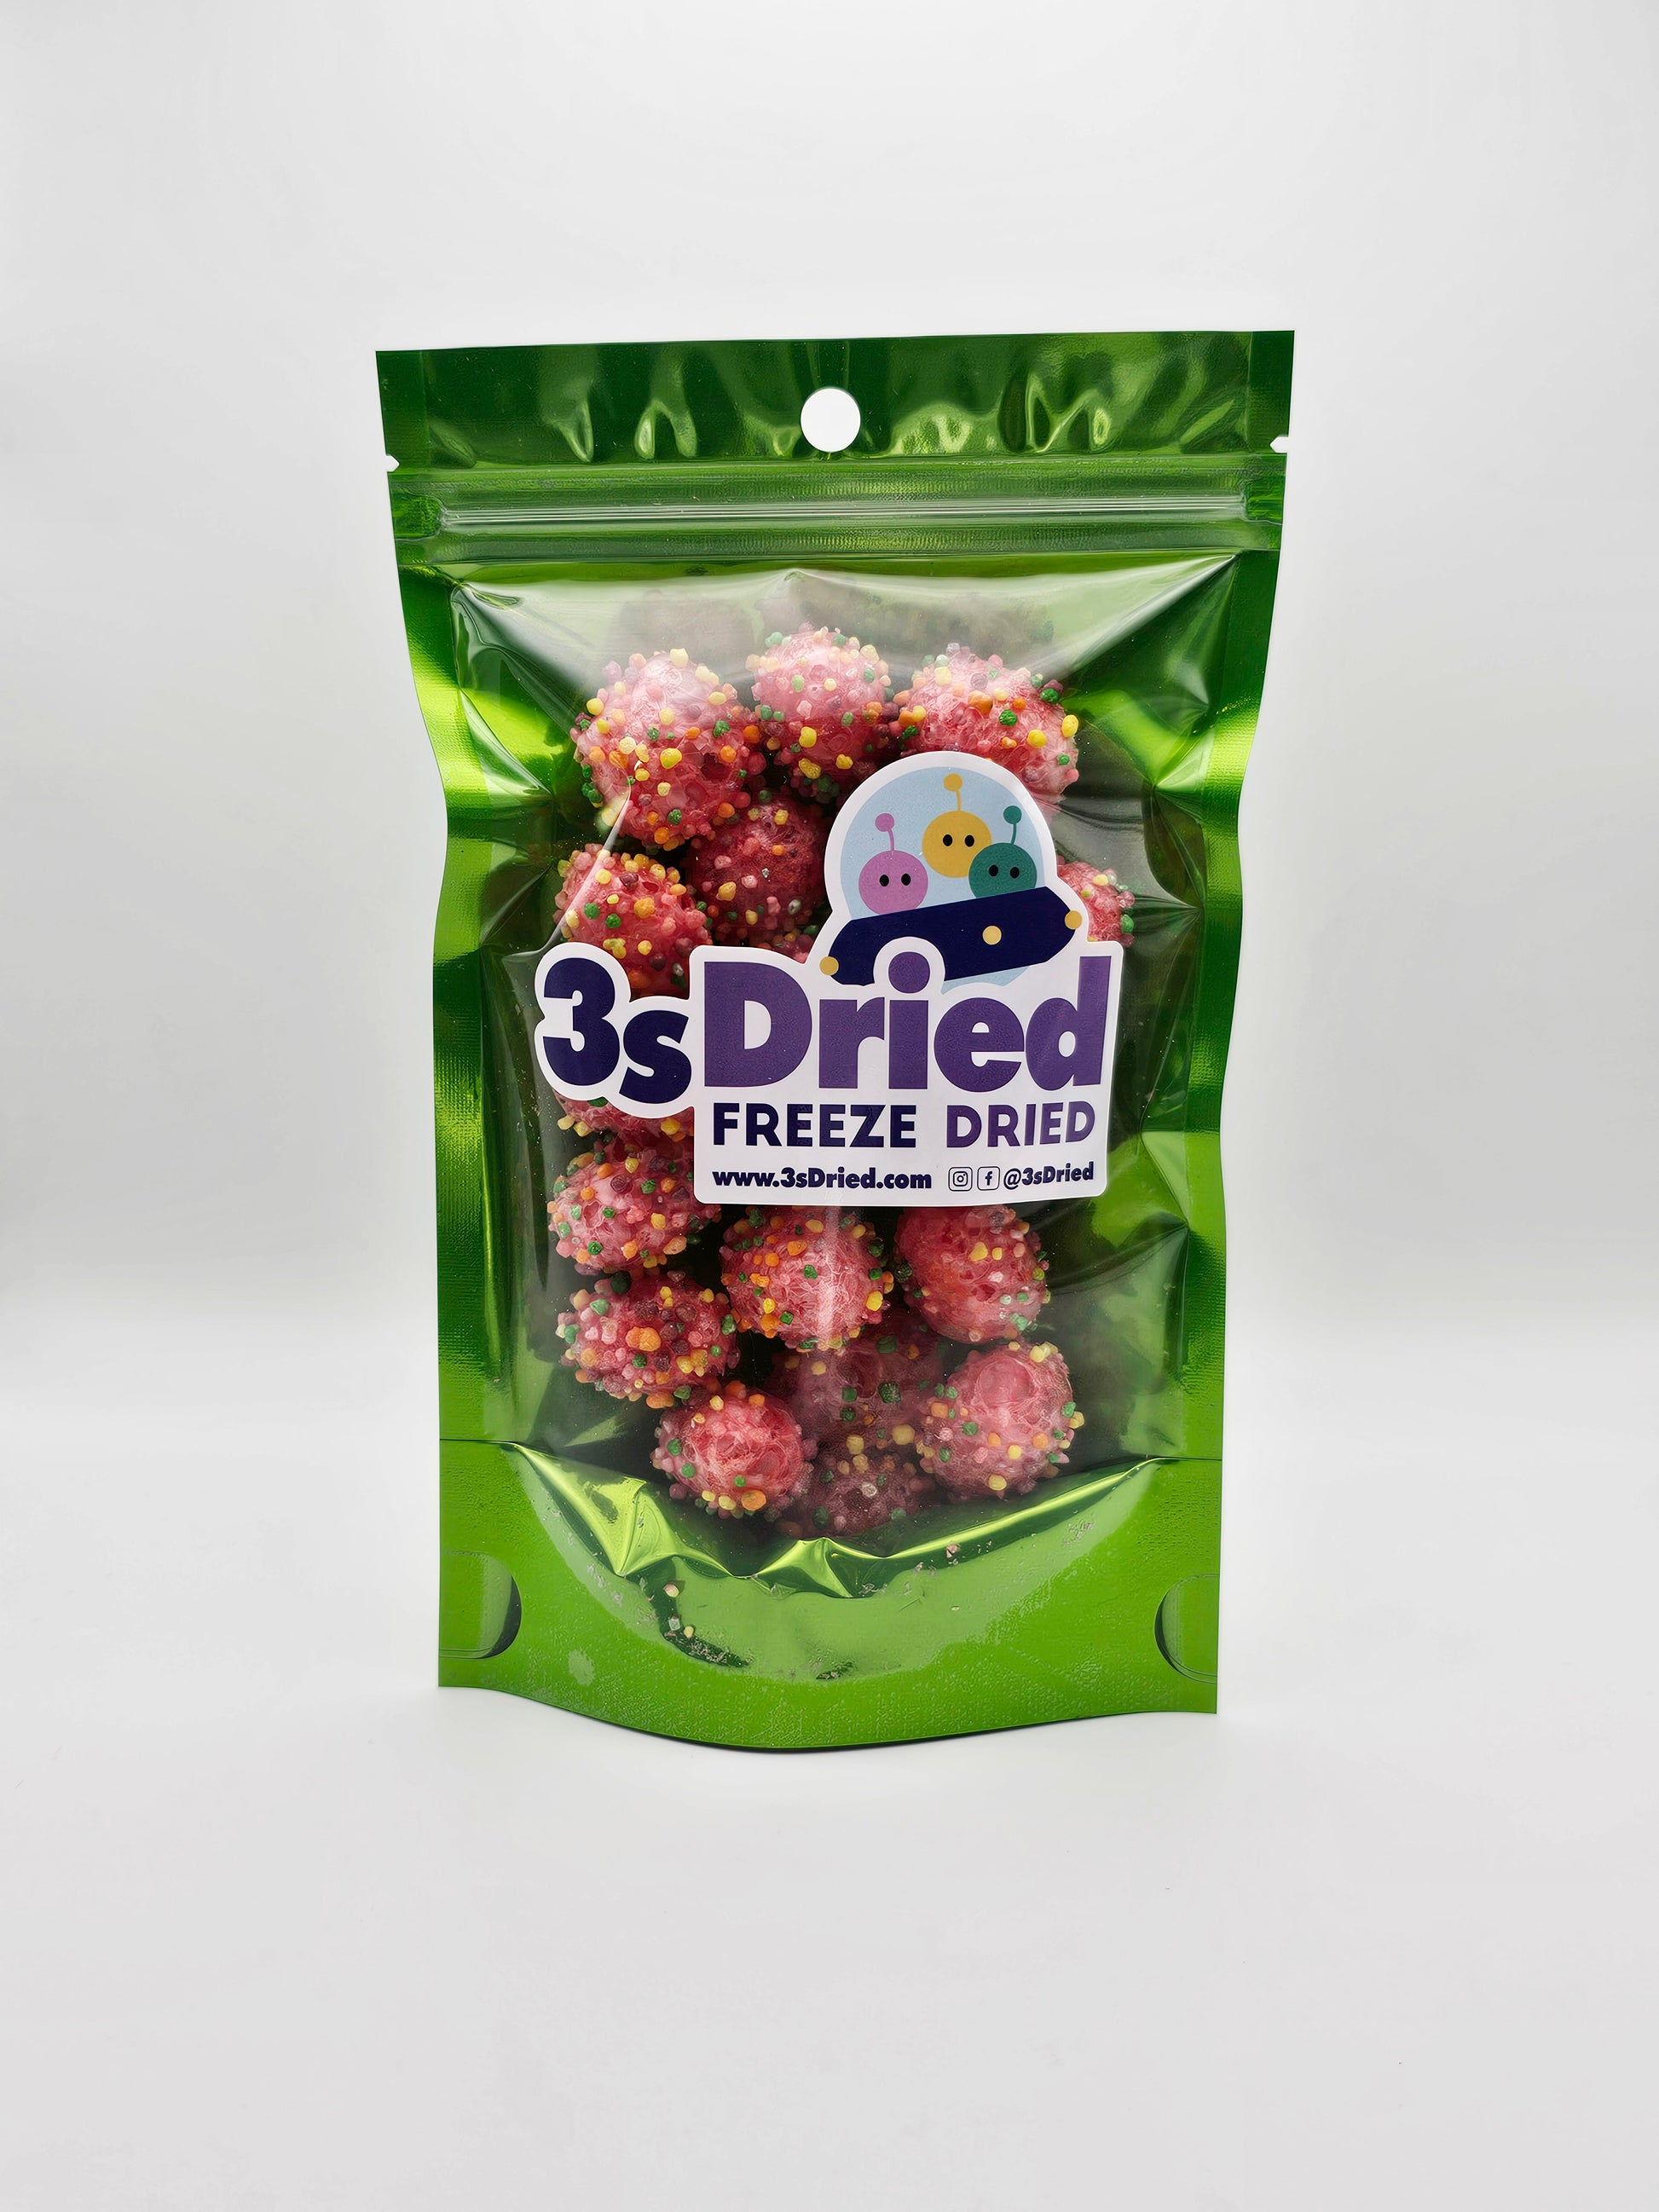 Freeze Dried Gummy Nerd Clusters - Delicious Nerds Candy Flavor